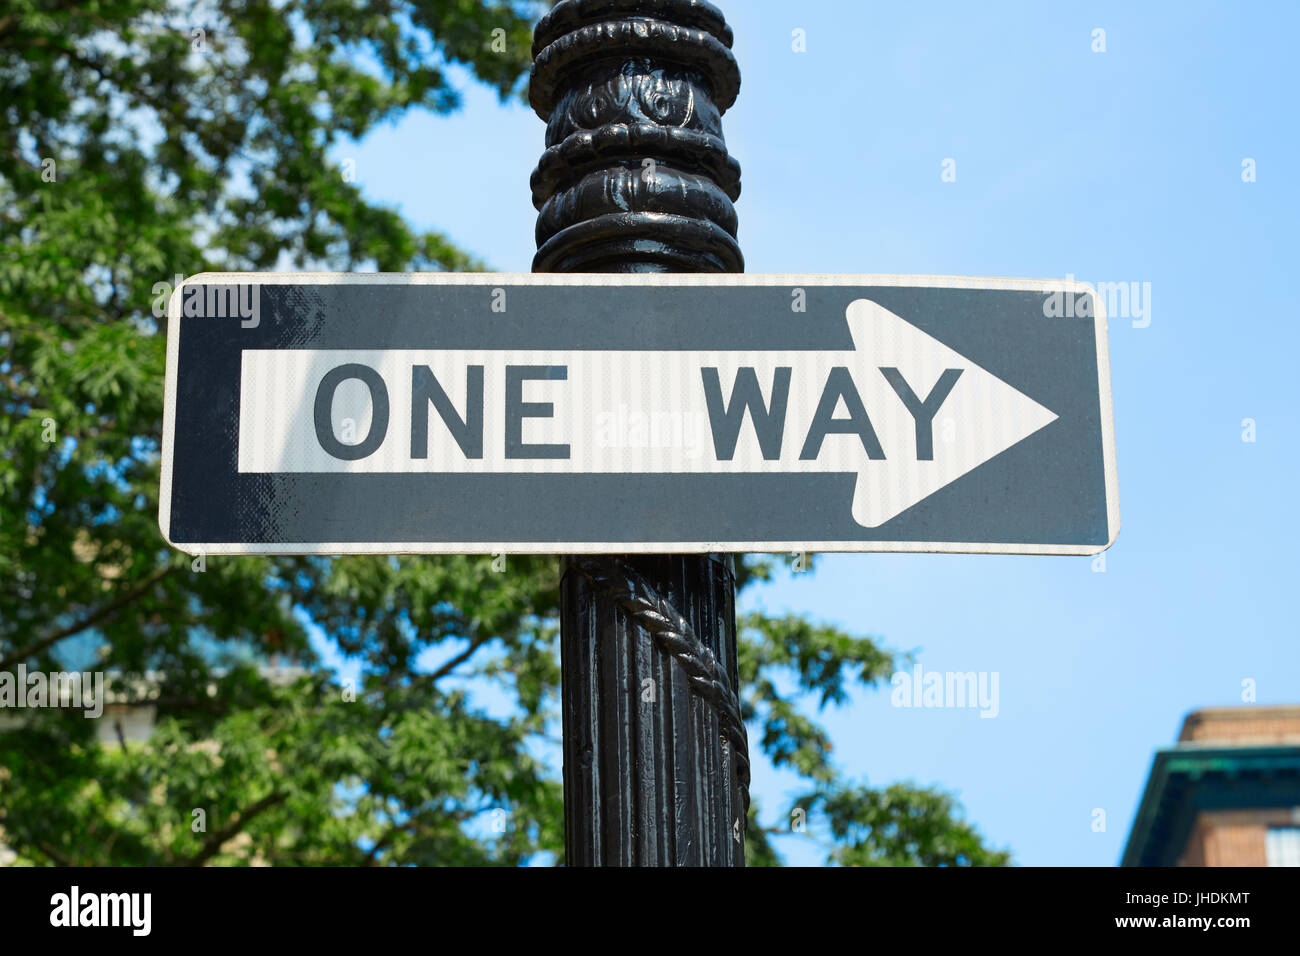 One way street sign in New York with green tree branches and blue sky Stock Photo